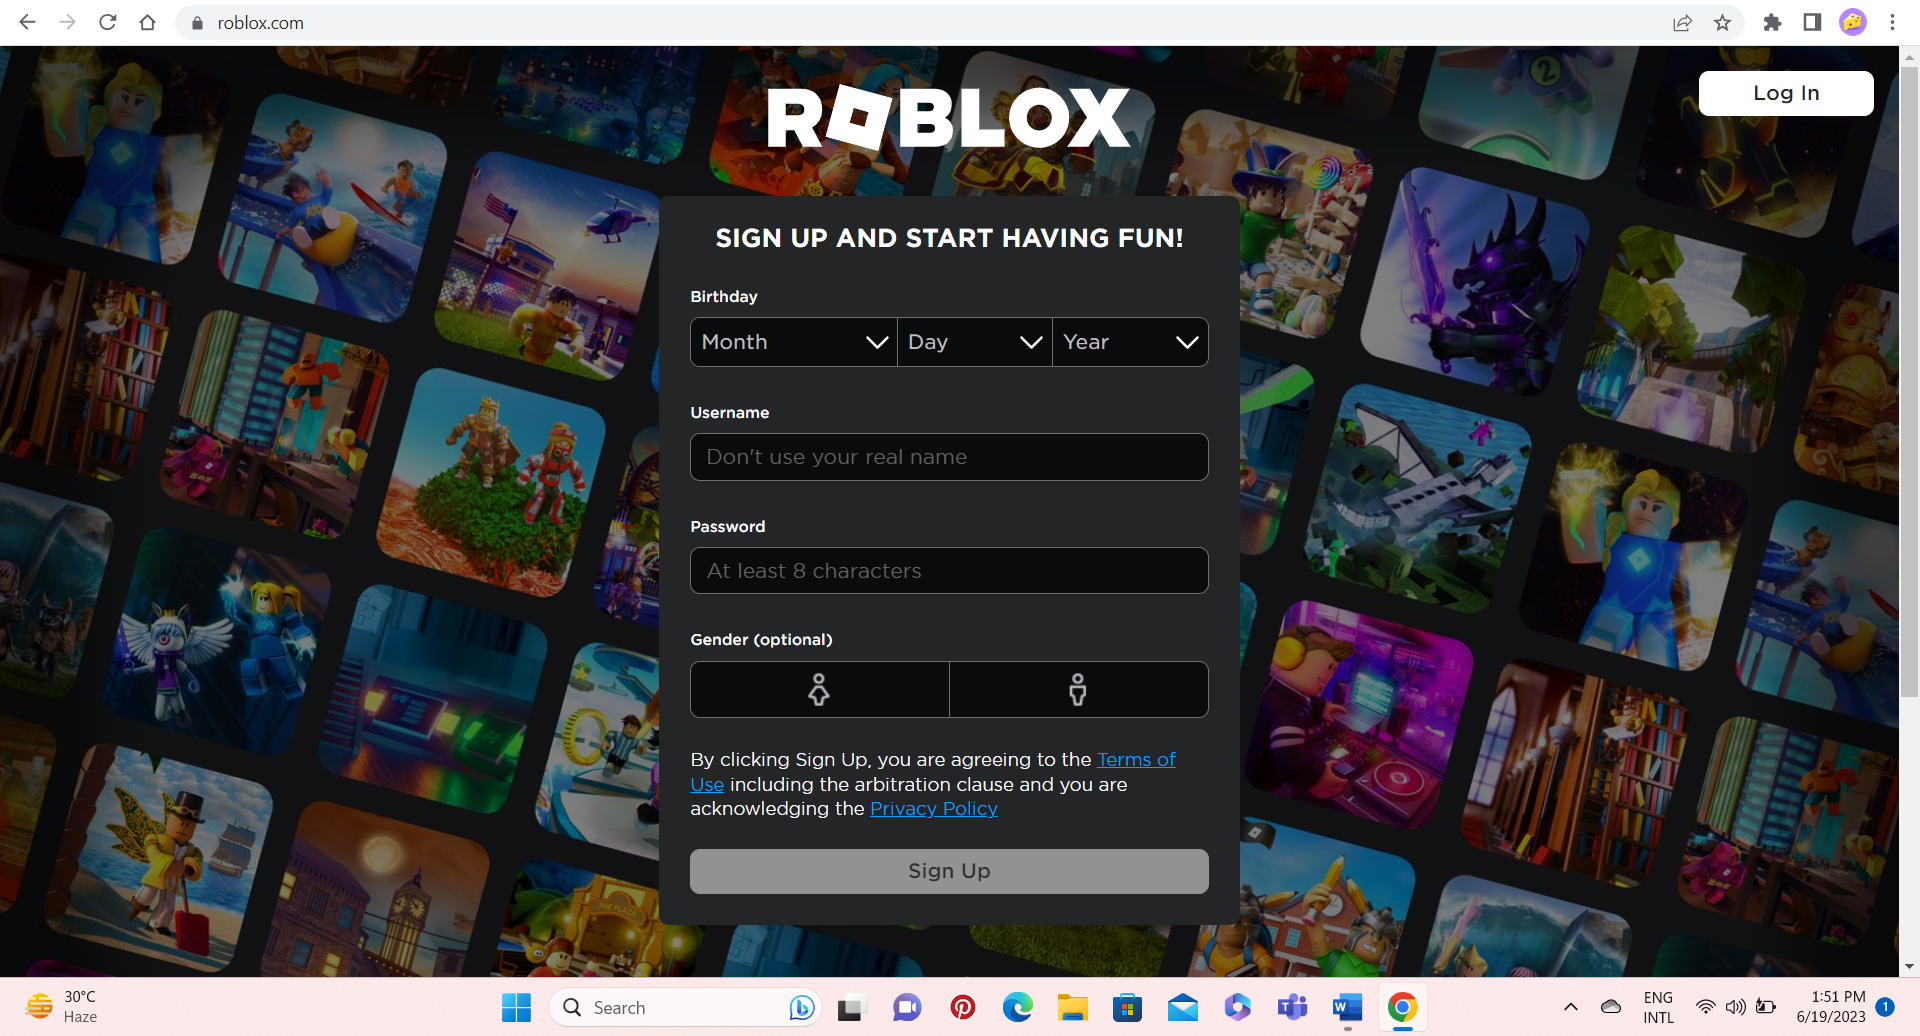 sign up screen for Roblox